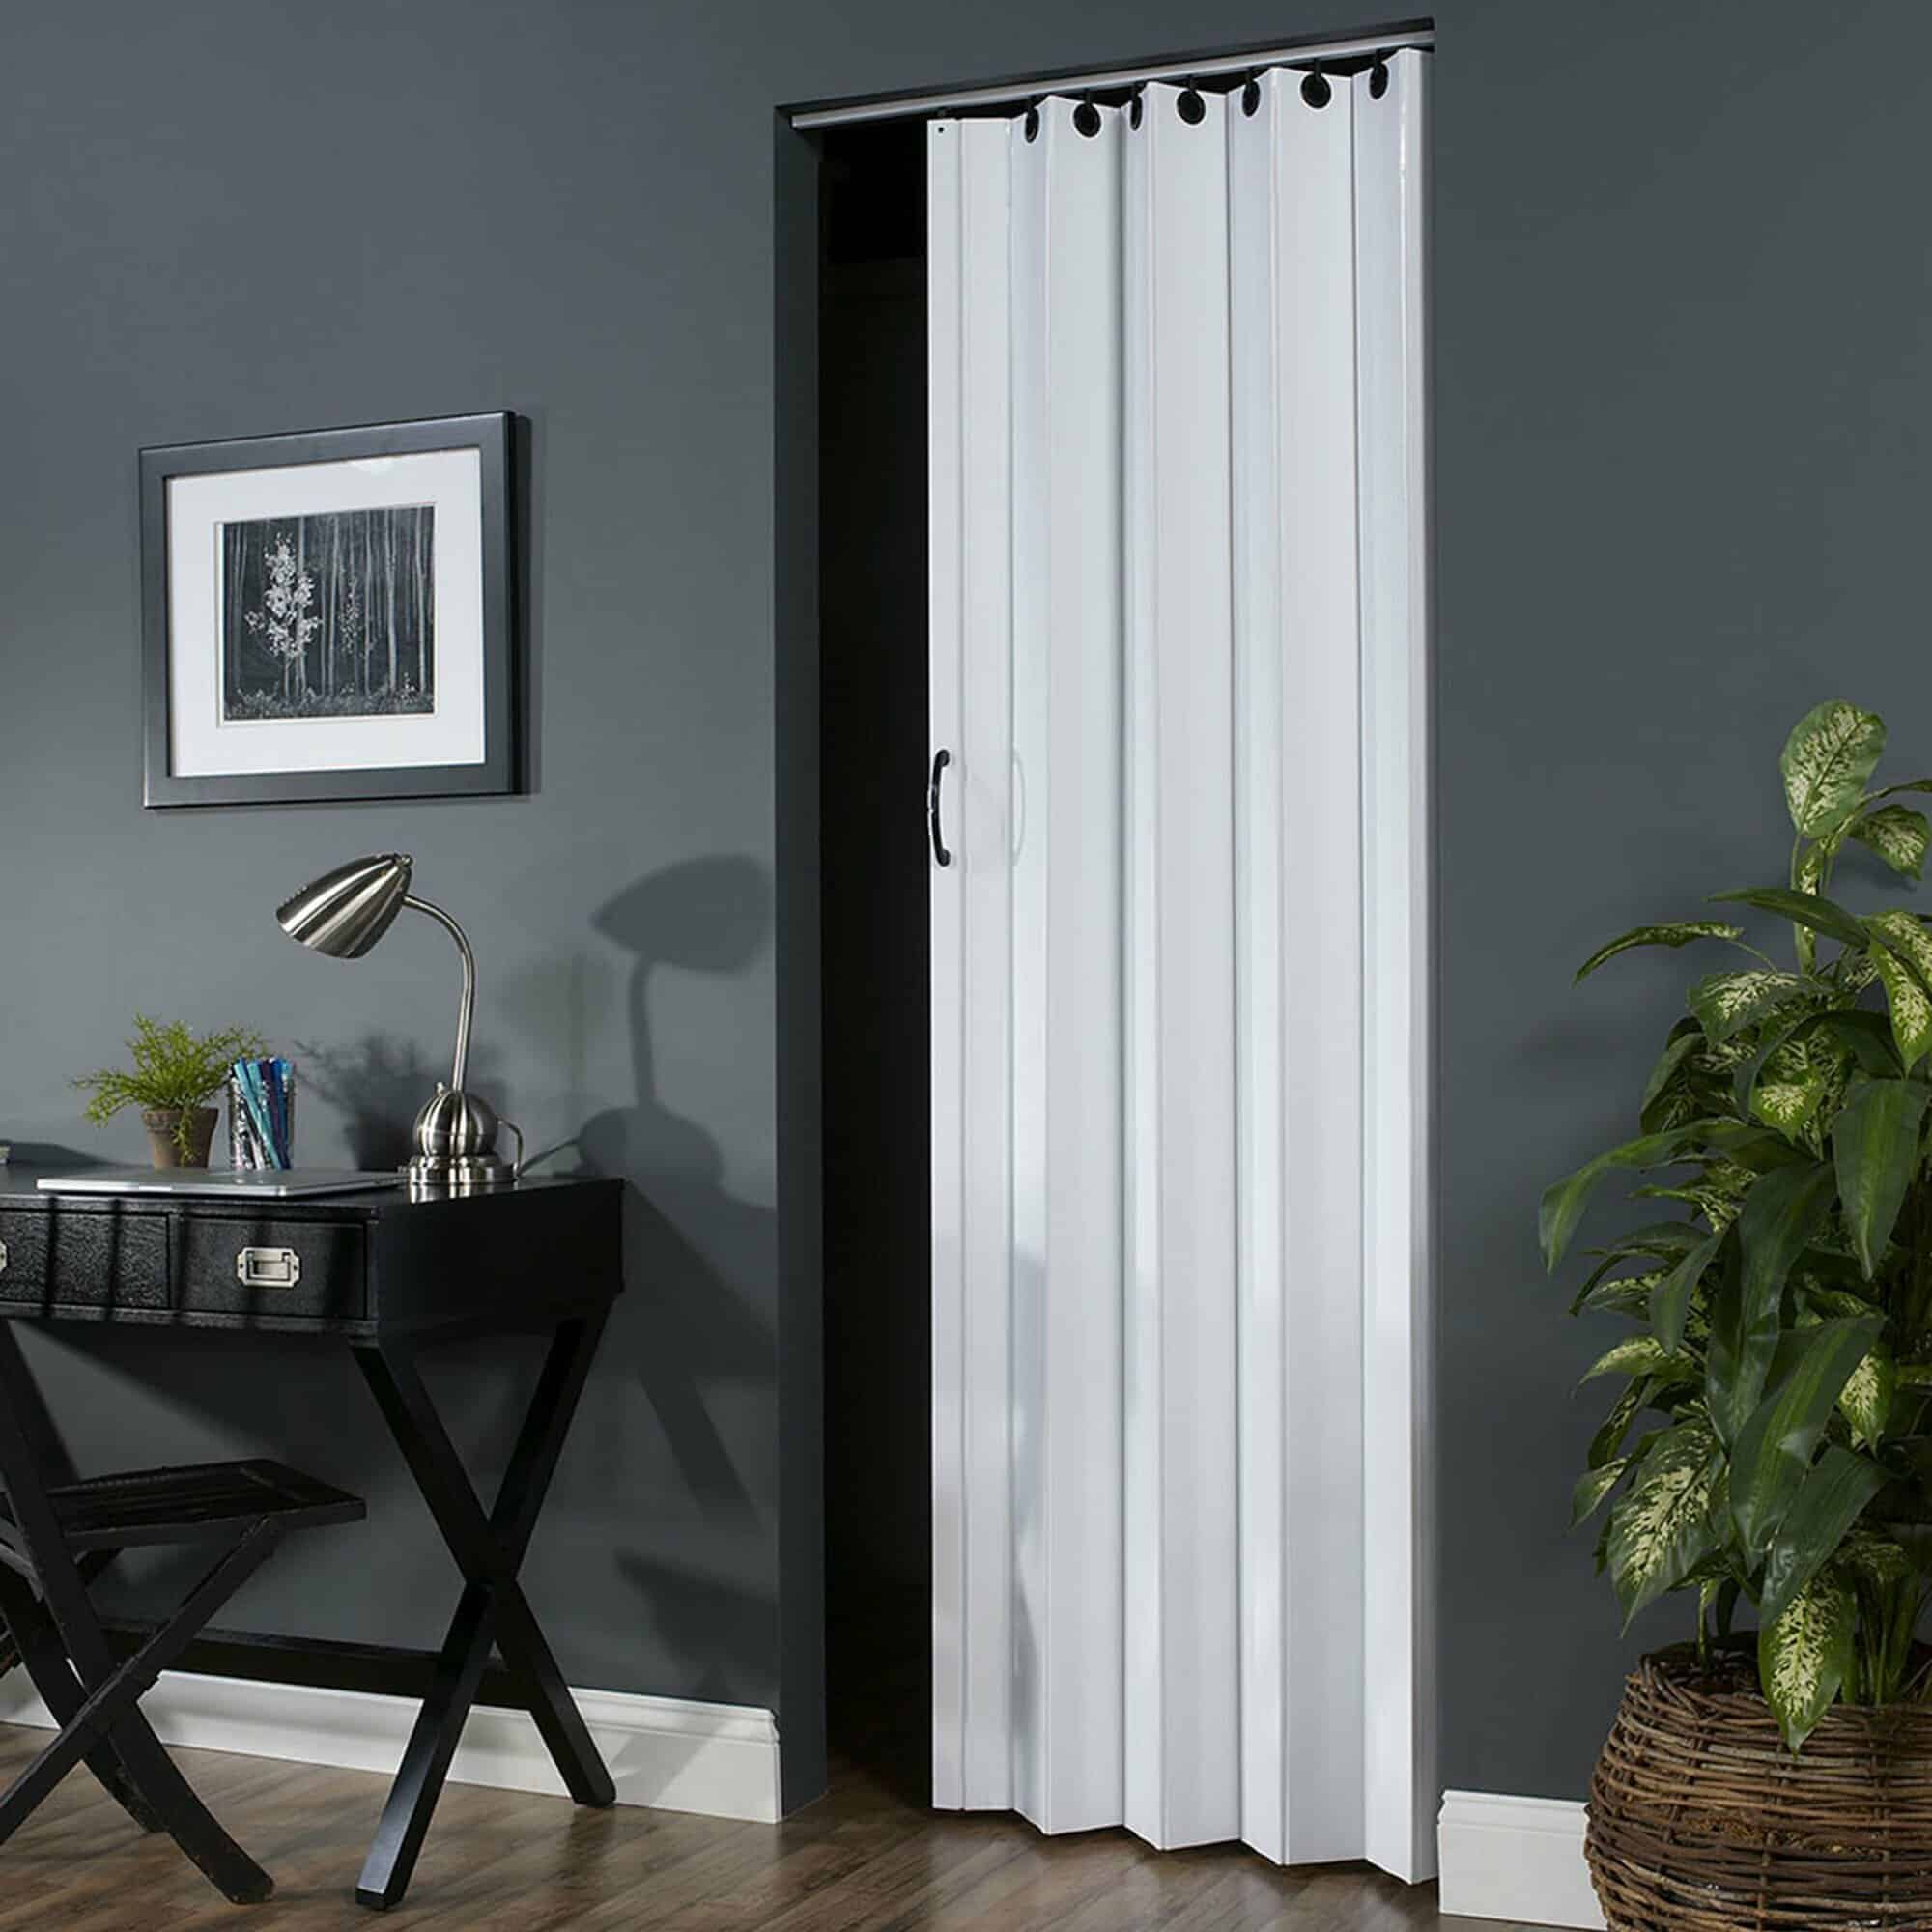 An Accordion Door Is An Unconventional But Practical Choice For A Bathroom